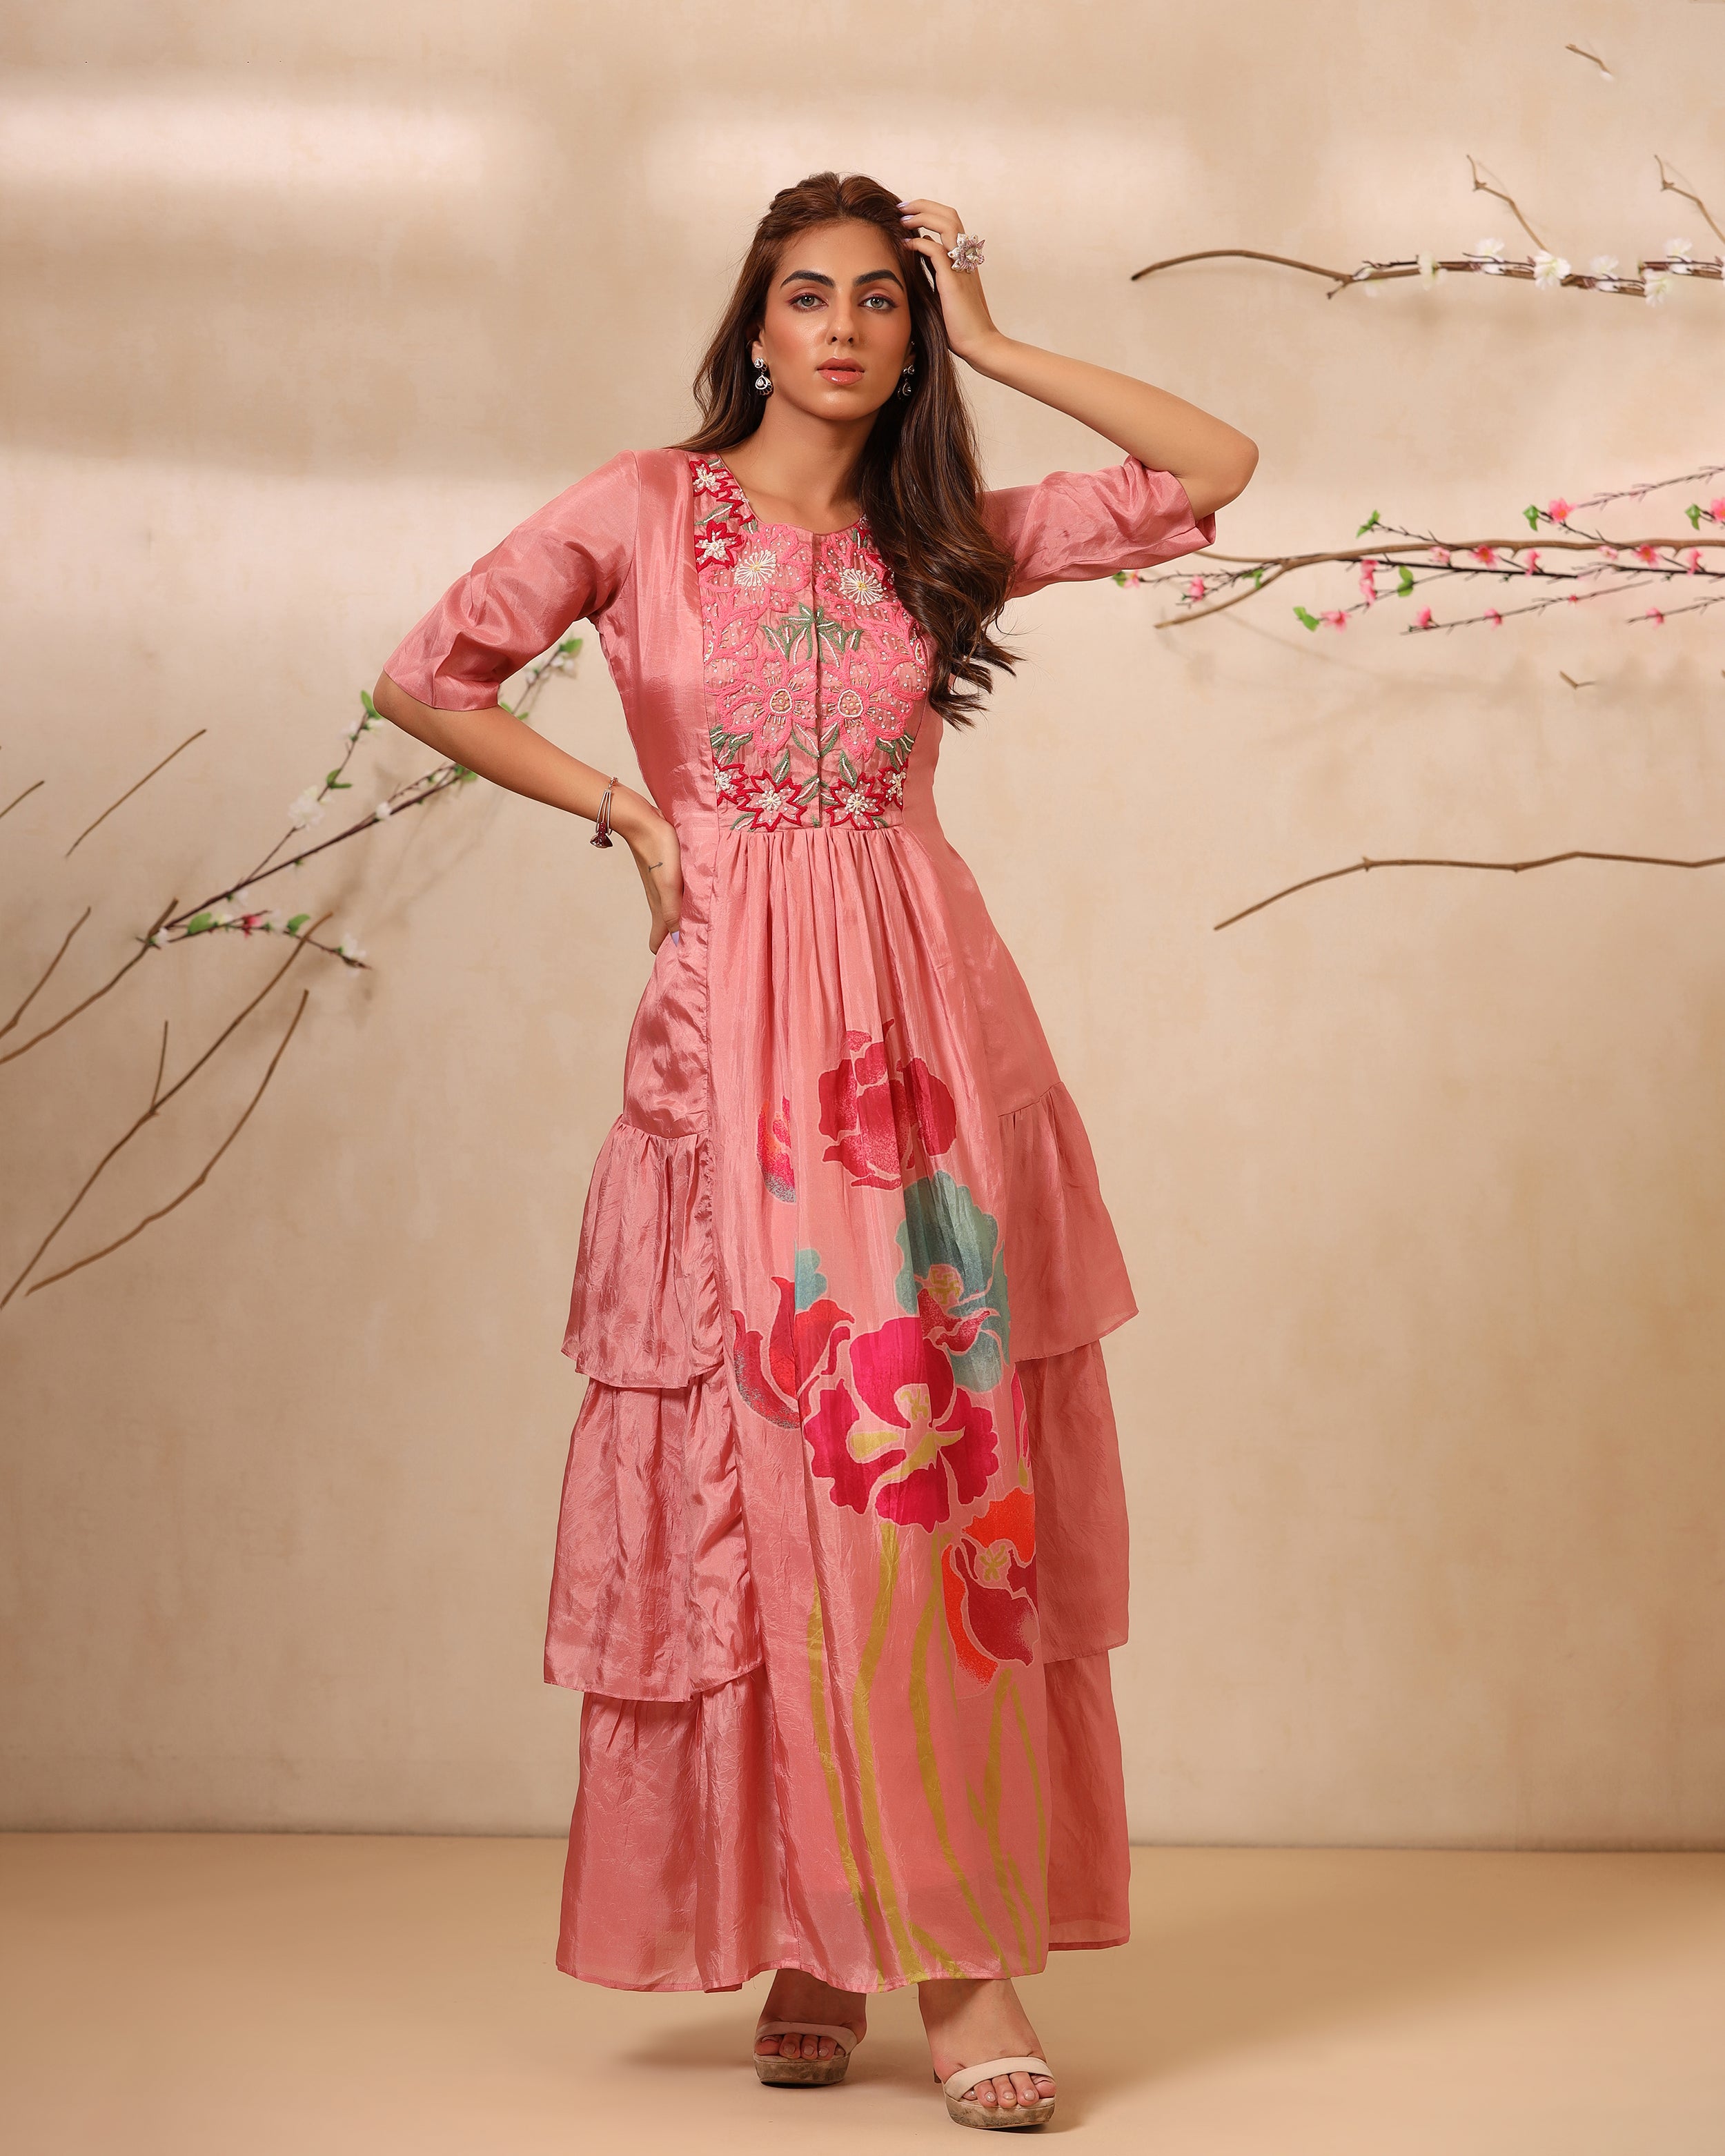 Old rose flower gown